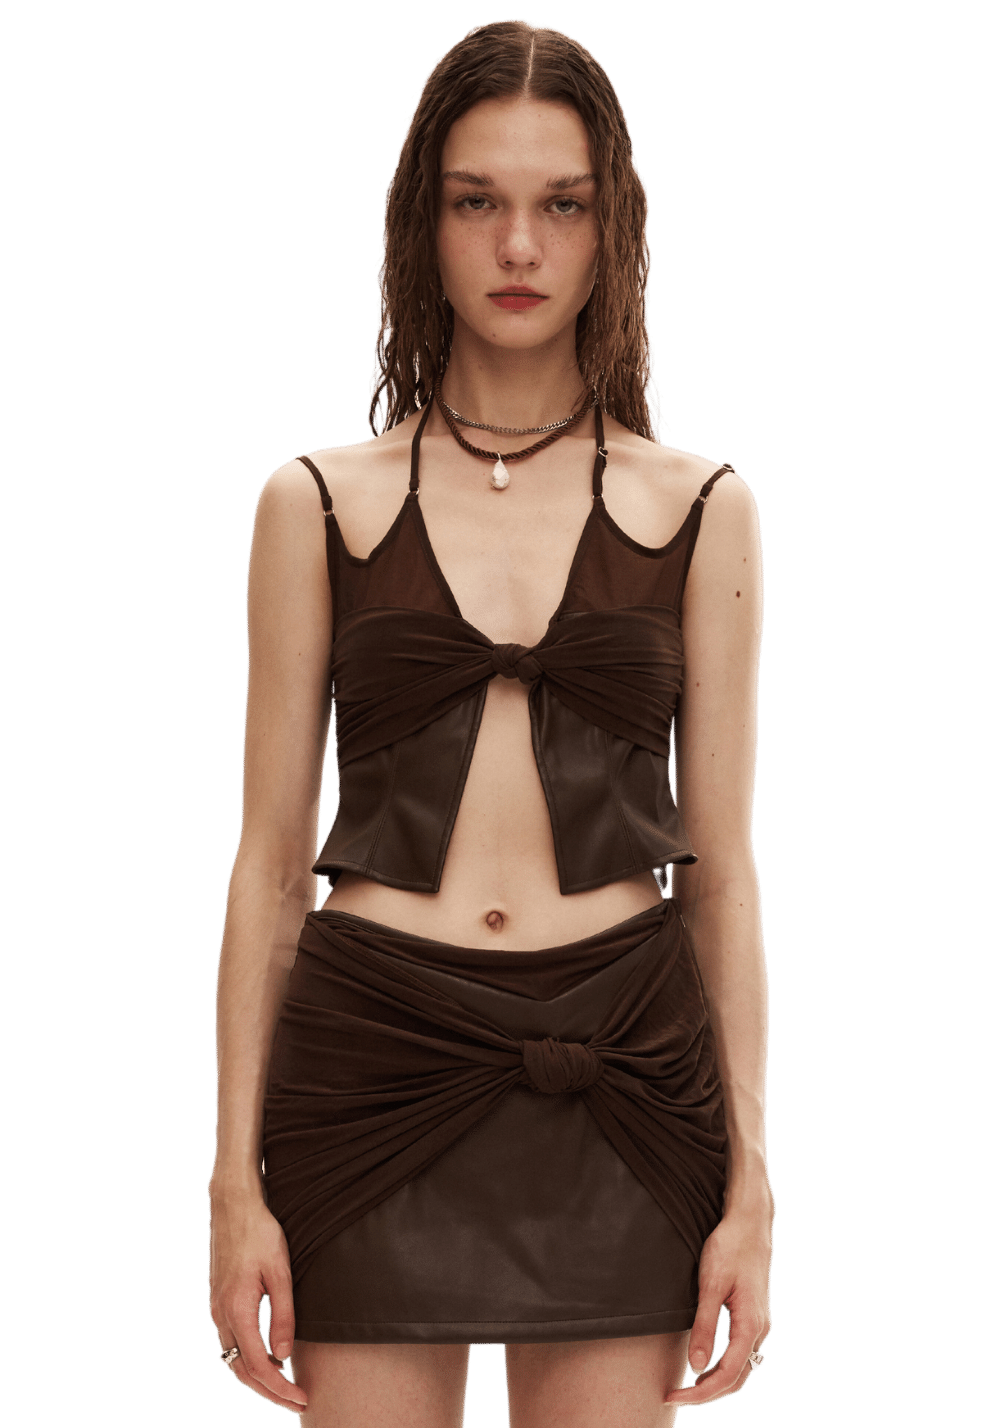 Knitted Patchwork Leather Knot Strap Top - PSYLOS 1, Knitted Patchwork Leather Knot Strap Top, T-Shirt, LEEWEI, PSYLOS 1